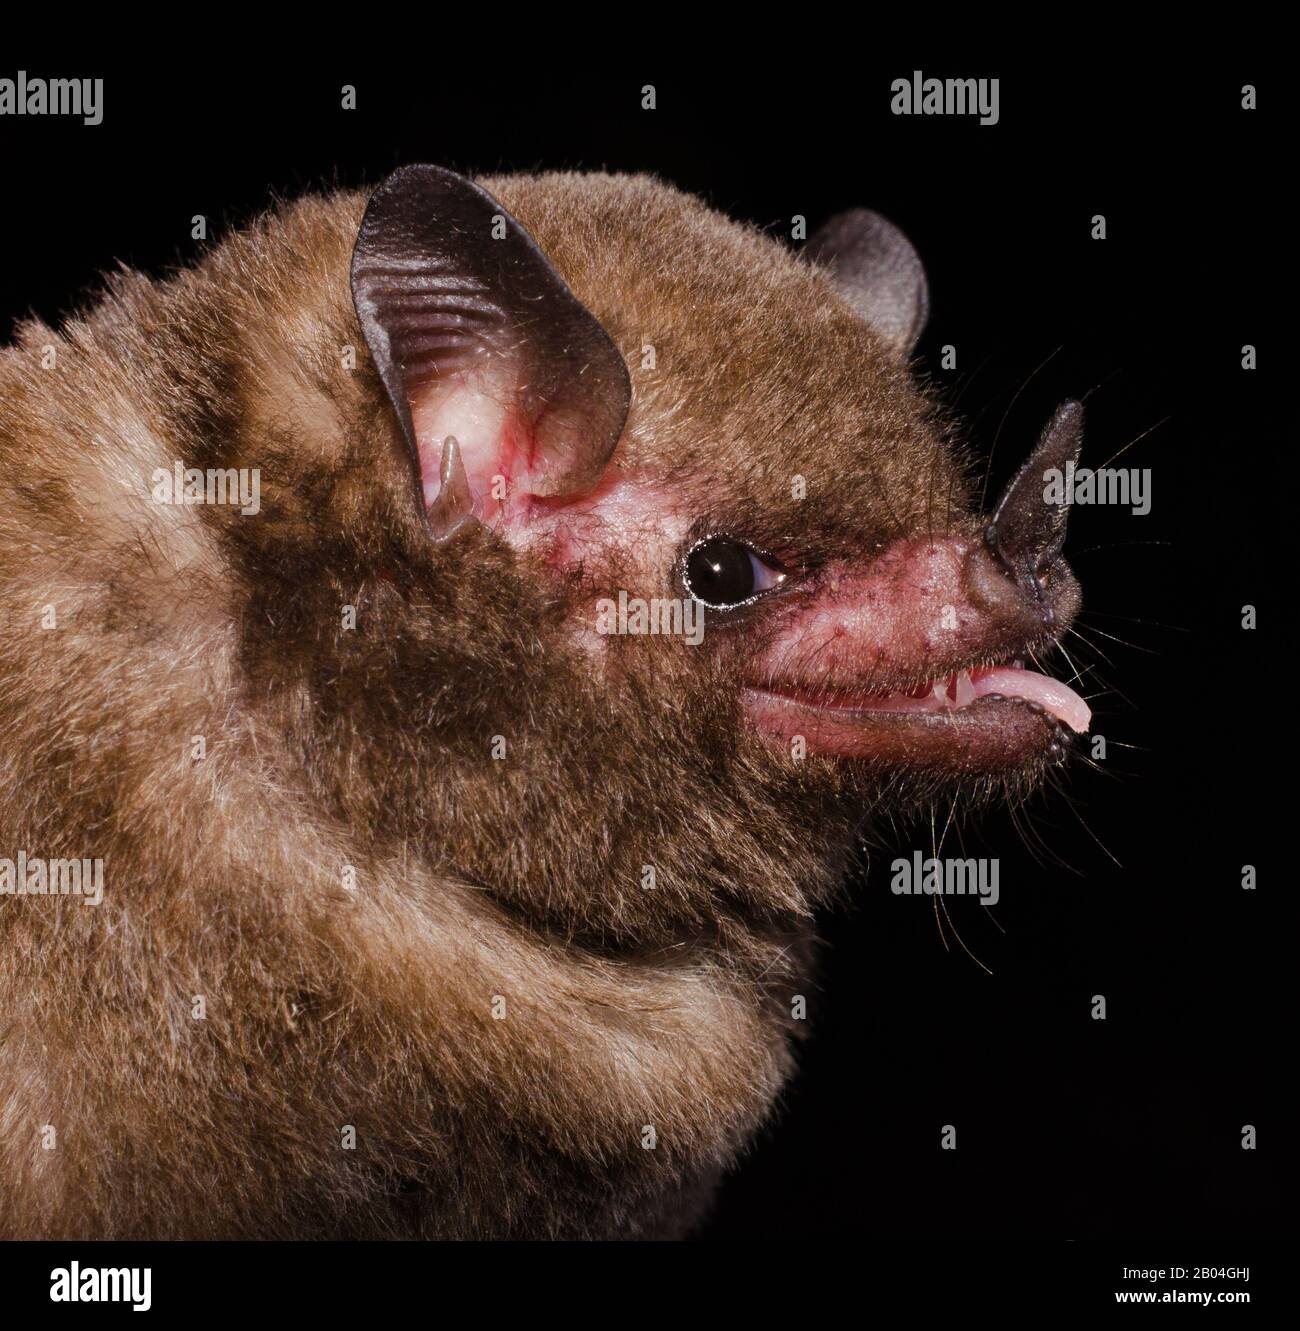 Pallas's long-tongued bat (Glossophaga soricina) is a South and Central American bat with a fast metabolism that feeds on nectar. Stock Photo